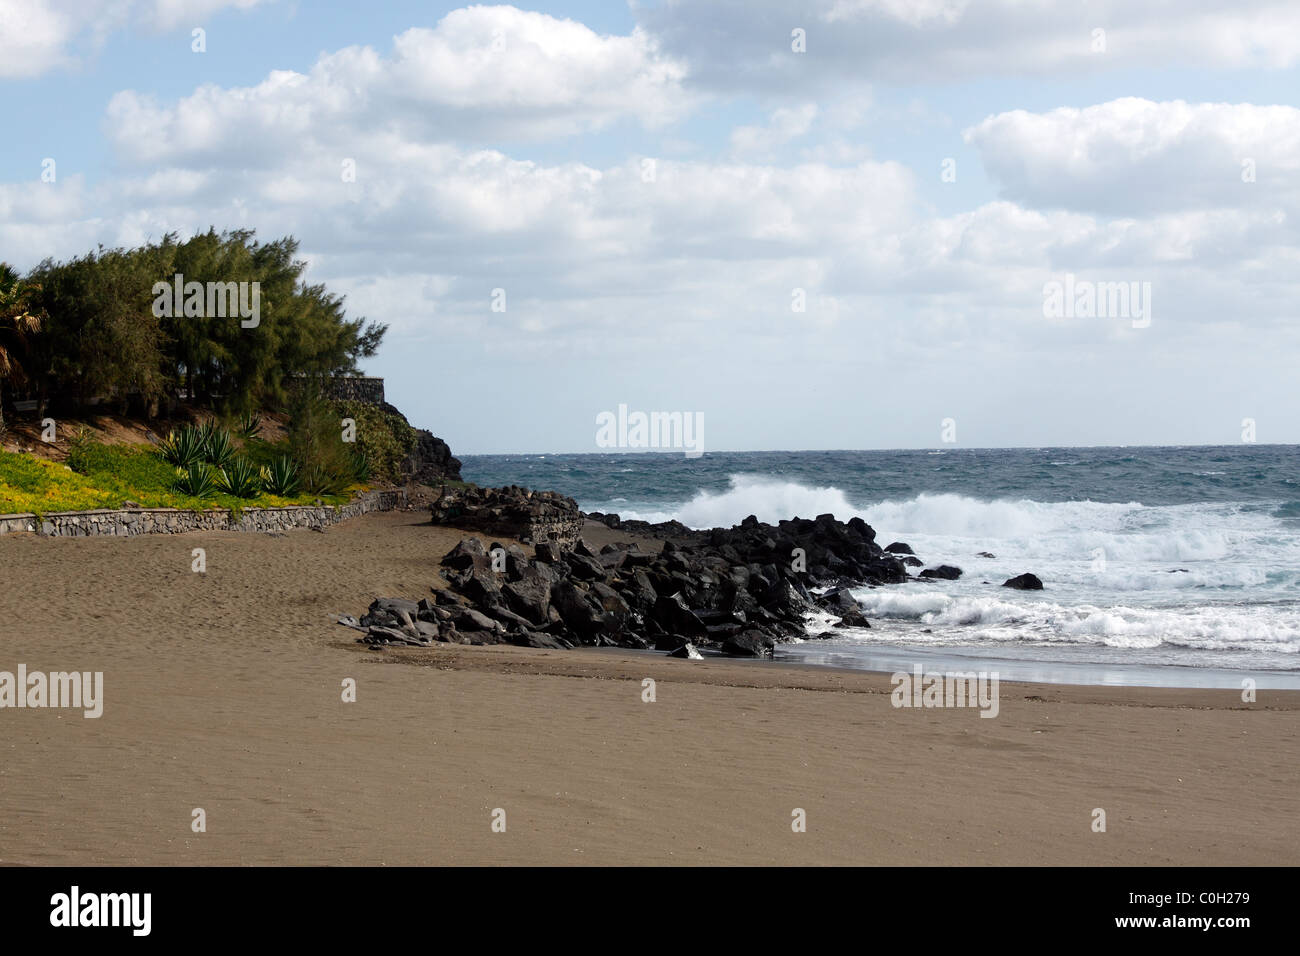 THE PICTURESQUE HEADLAND AT LA GARITA ON THE CANARY ISLAND OF GRAN CANARIA. Stock Photo